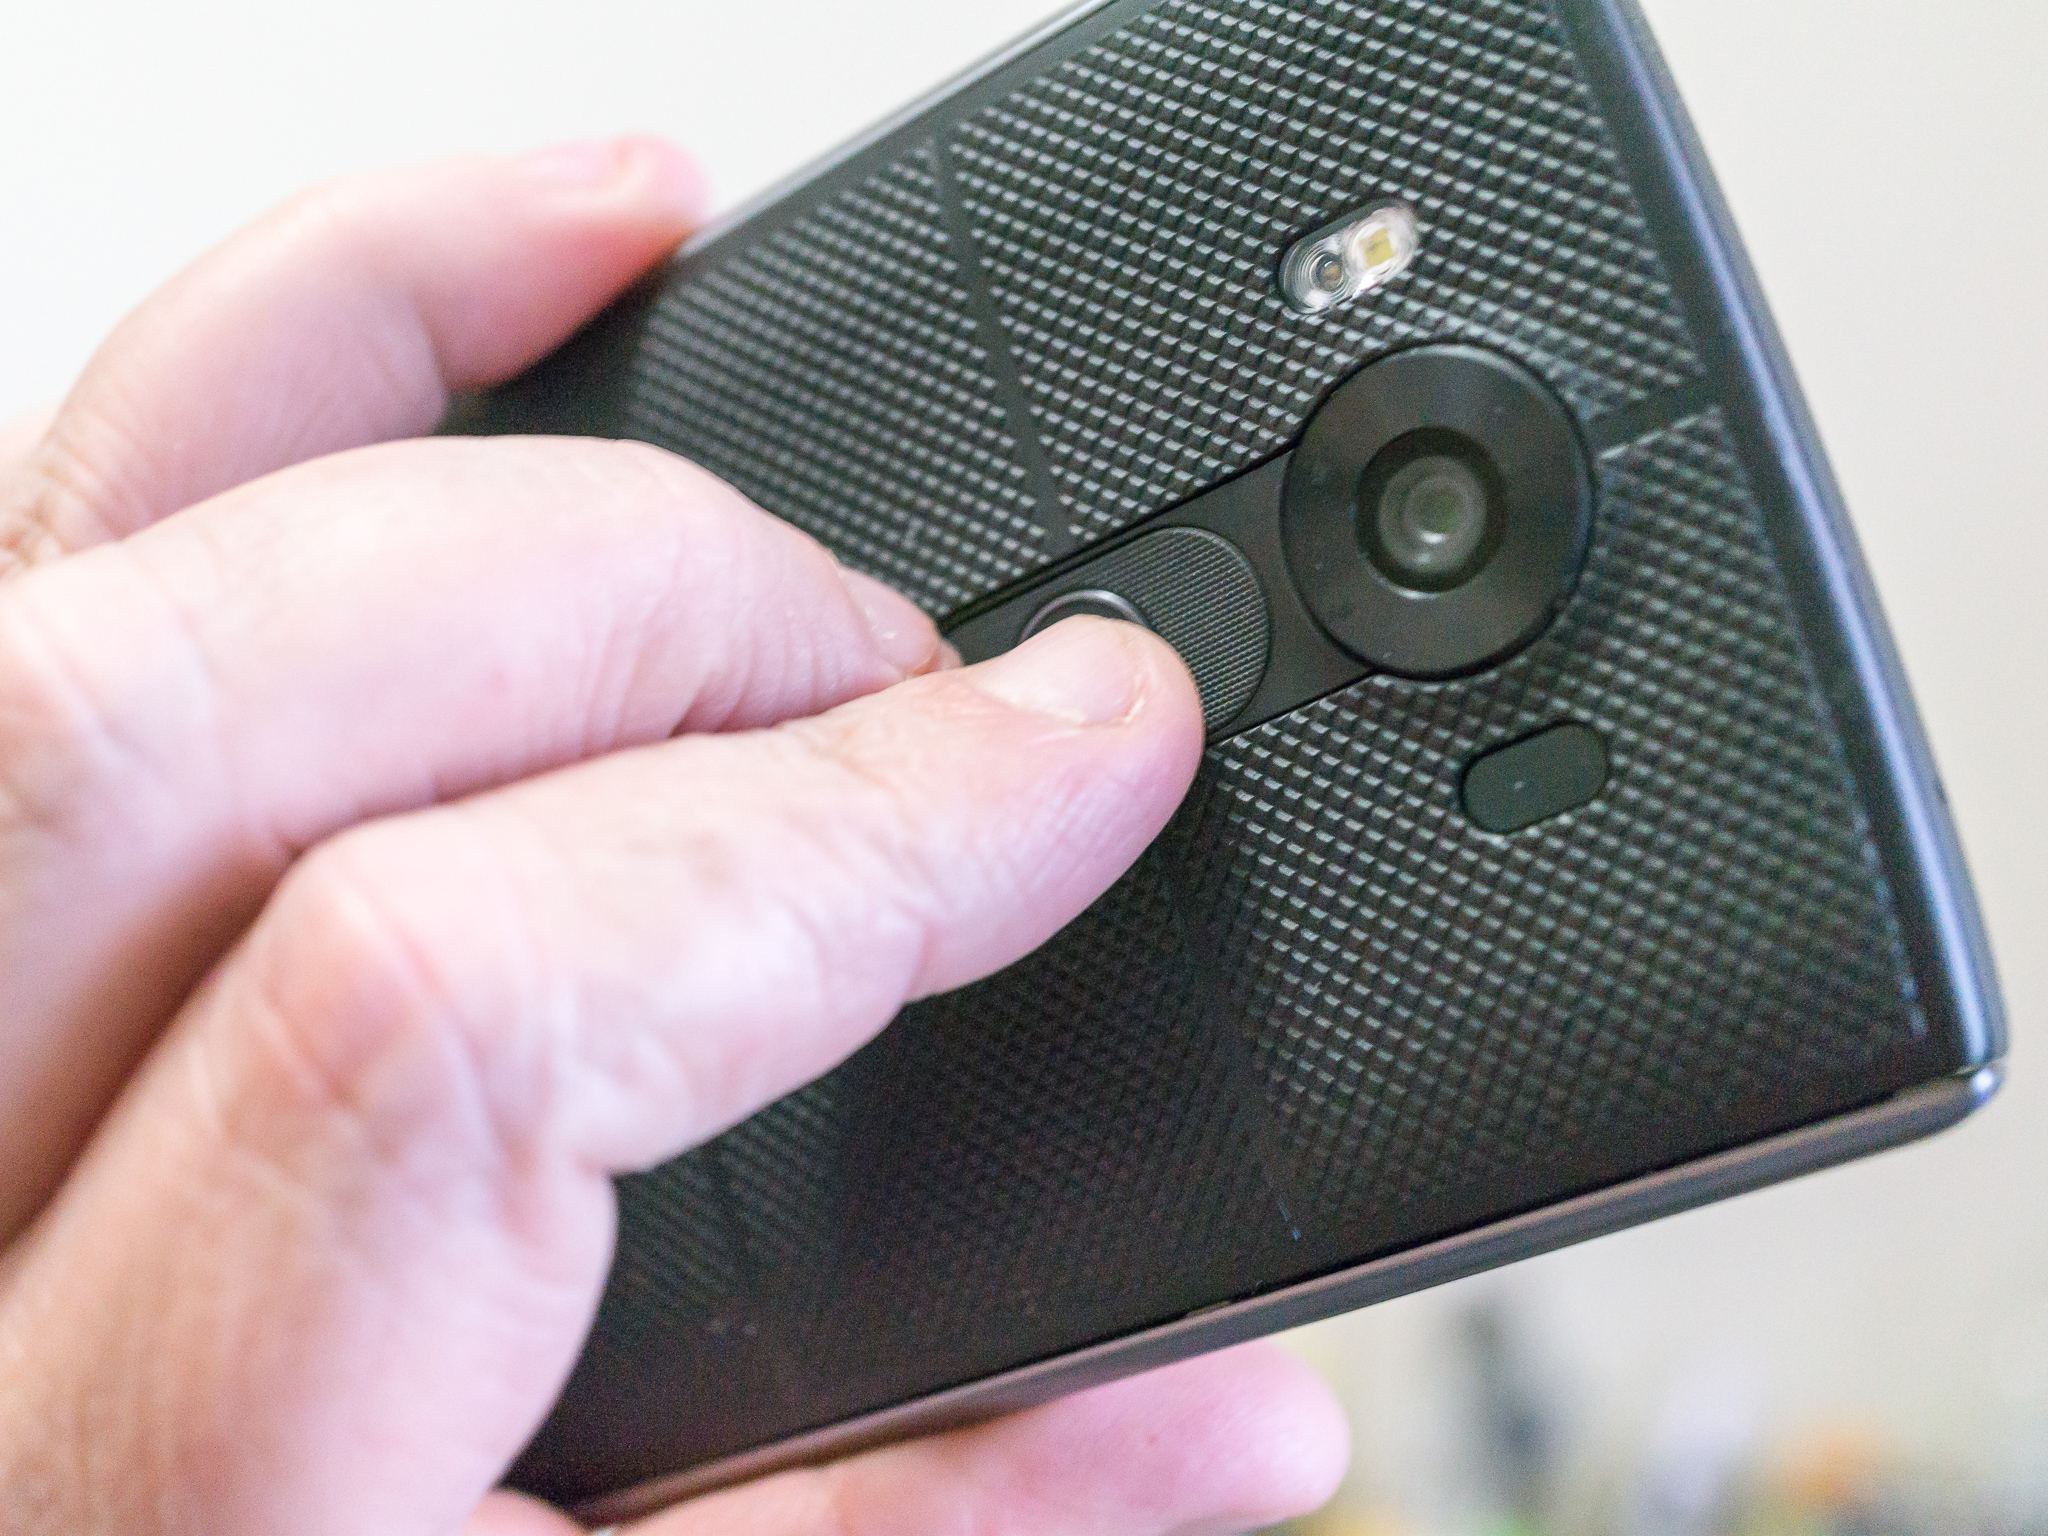 How to take a screenshot on the LG V10 | Android Central